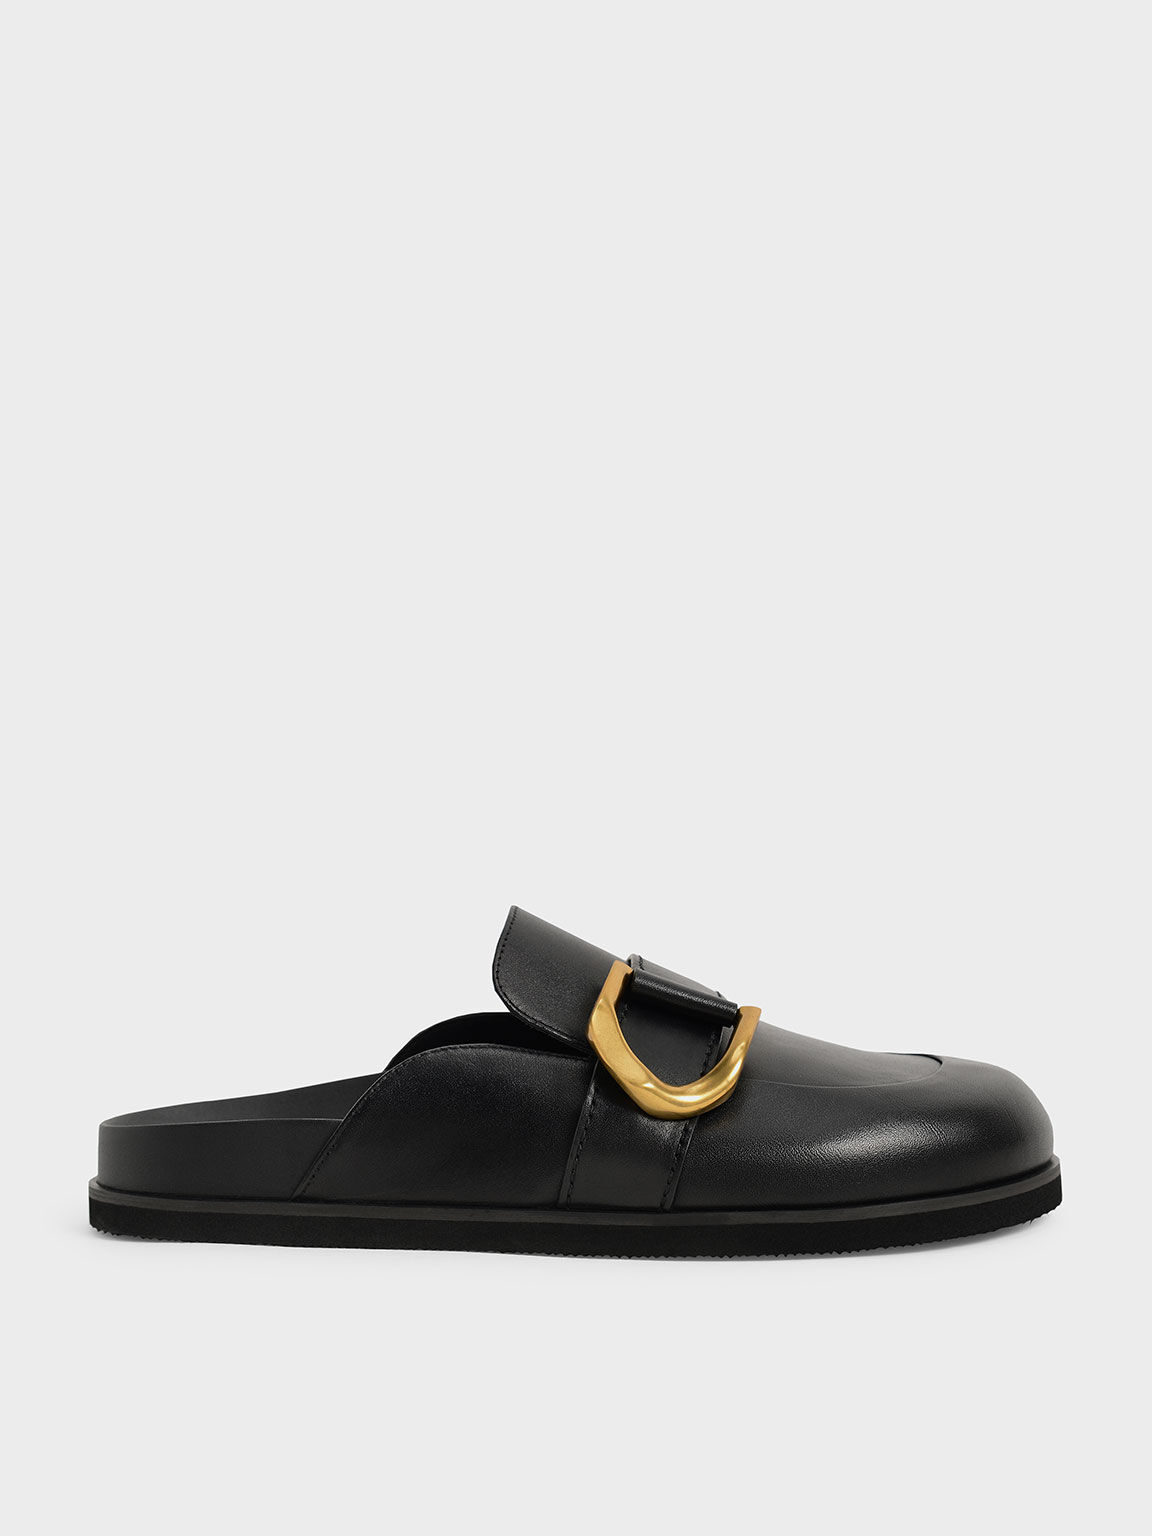 Black Gabine Buckled Leather Loafer Mules - CHARLES & KEITH US